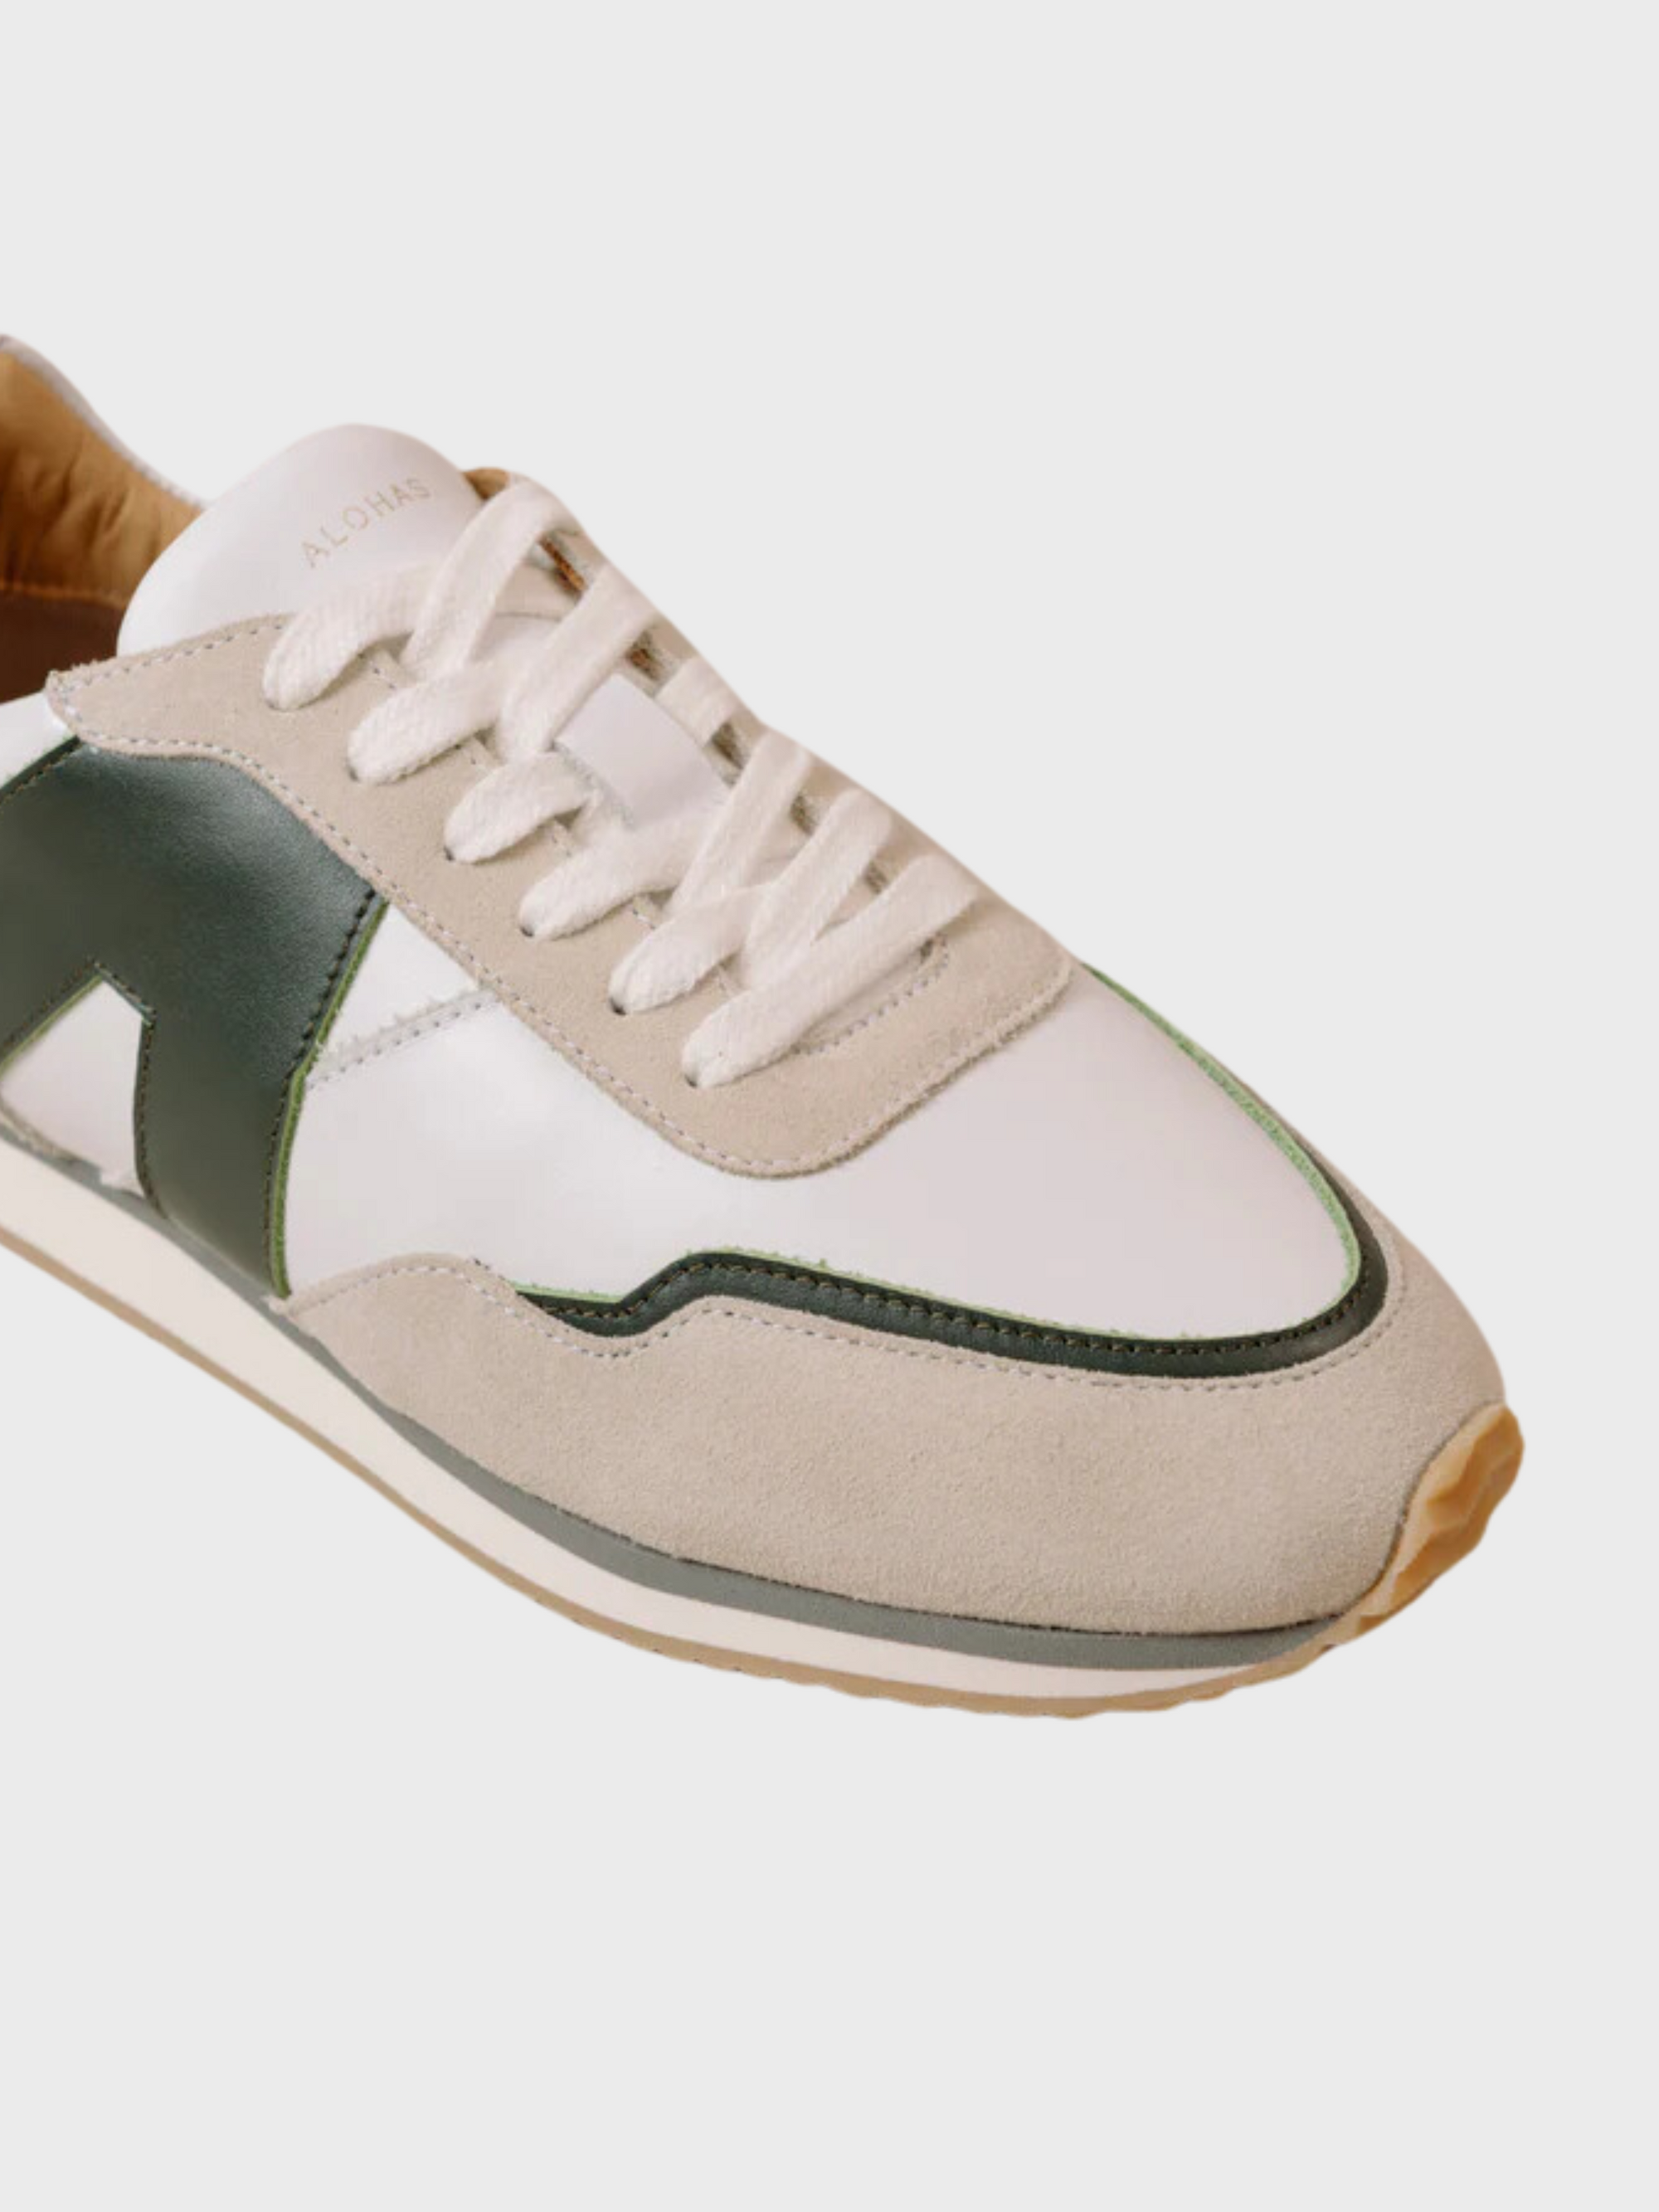 ALOHAS tb.015 Sneaker Bright White Dark Green-Sneakers-West of Woodward Boutique-Vancouver-Canada